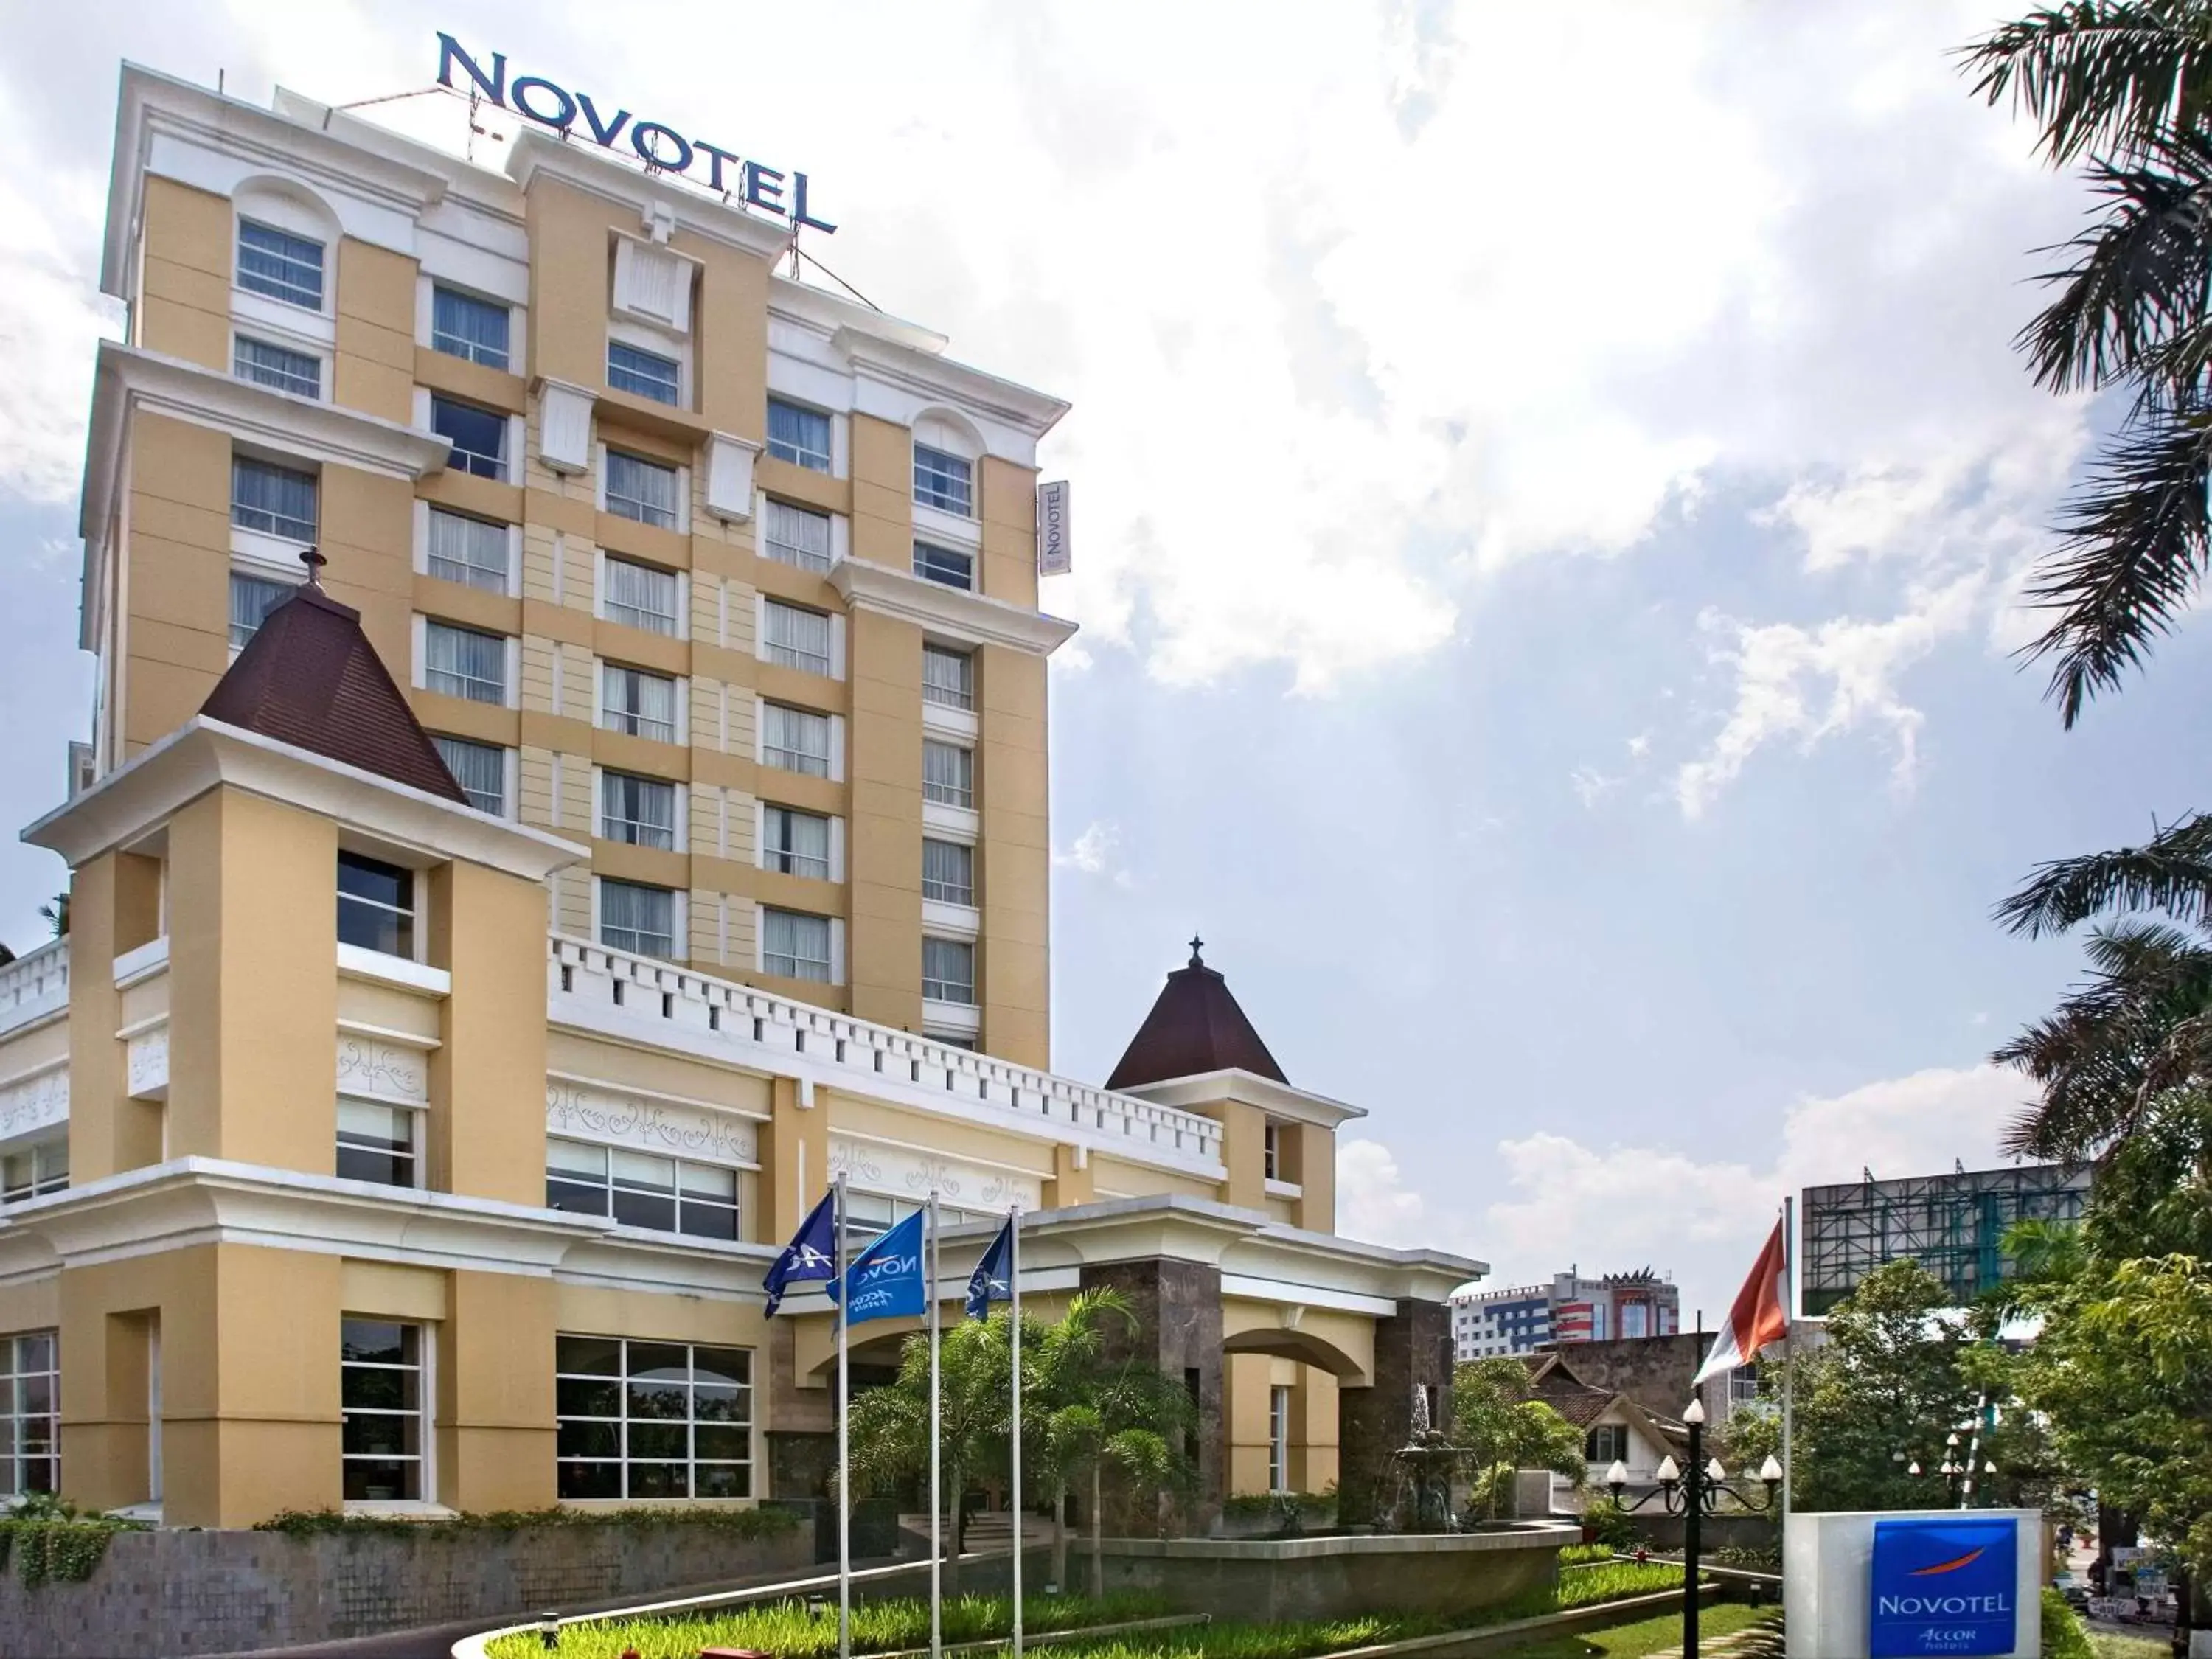 Property building in Novotel Semarang - GeNose Ready, CHSE Certified